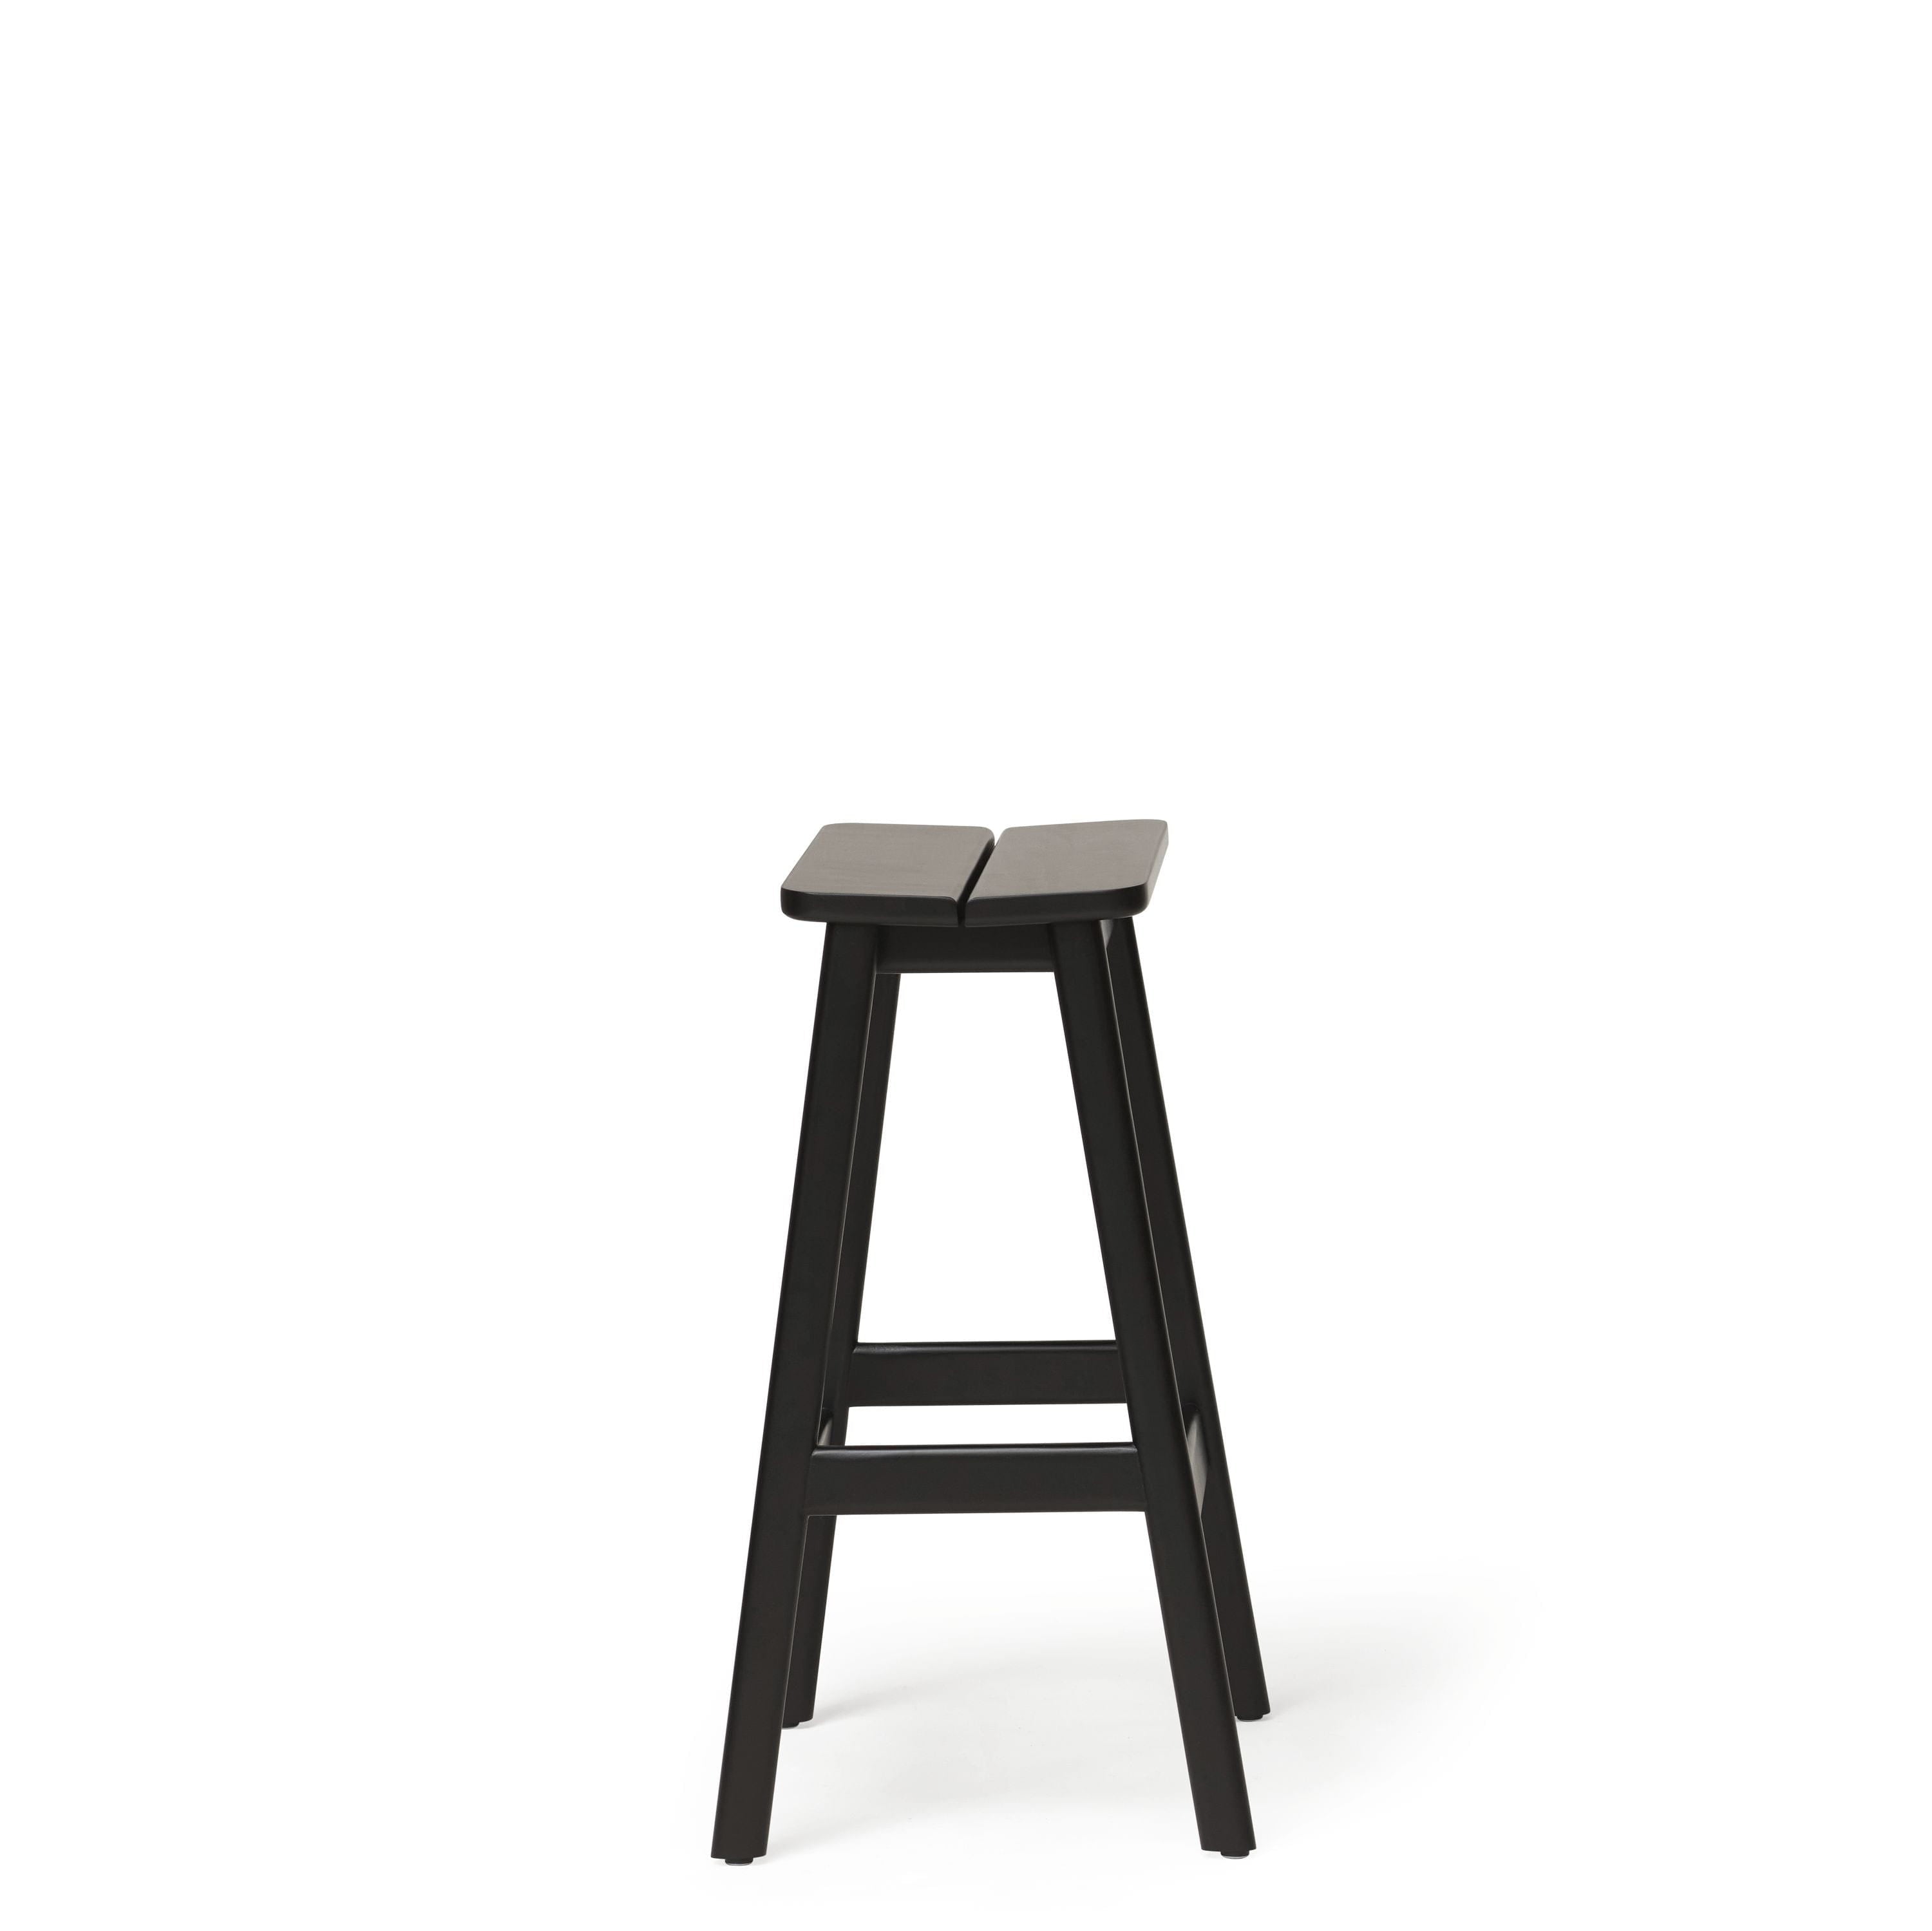 Form & Refine Angle Standard Bar Stool 65 Cm. Black Stained Beech